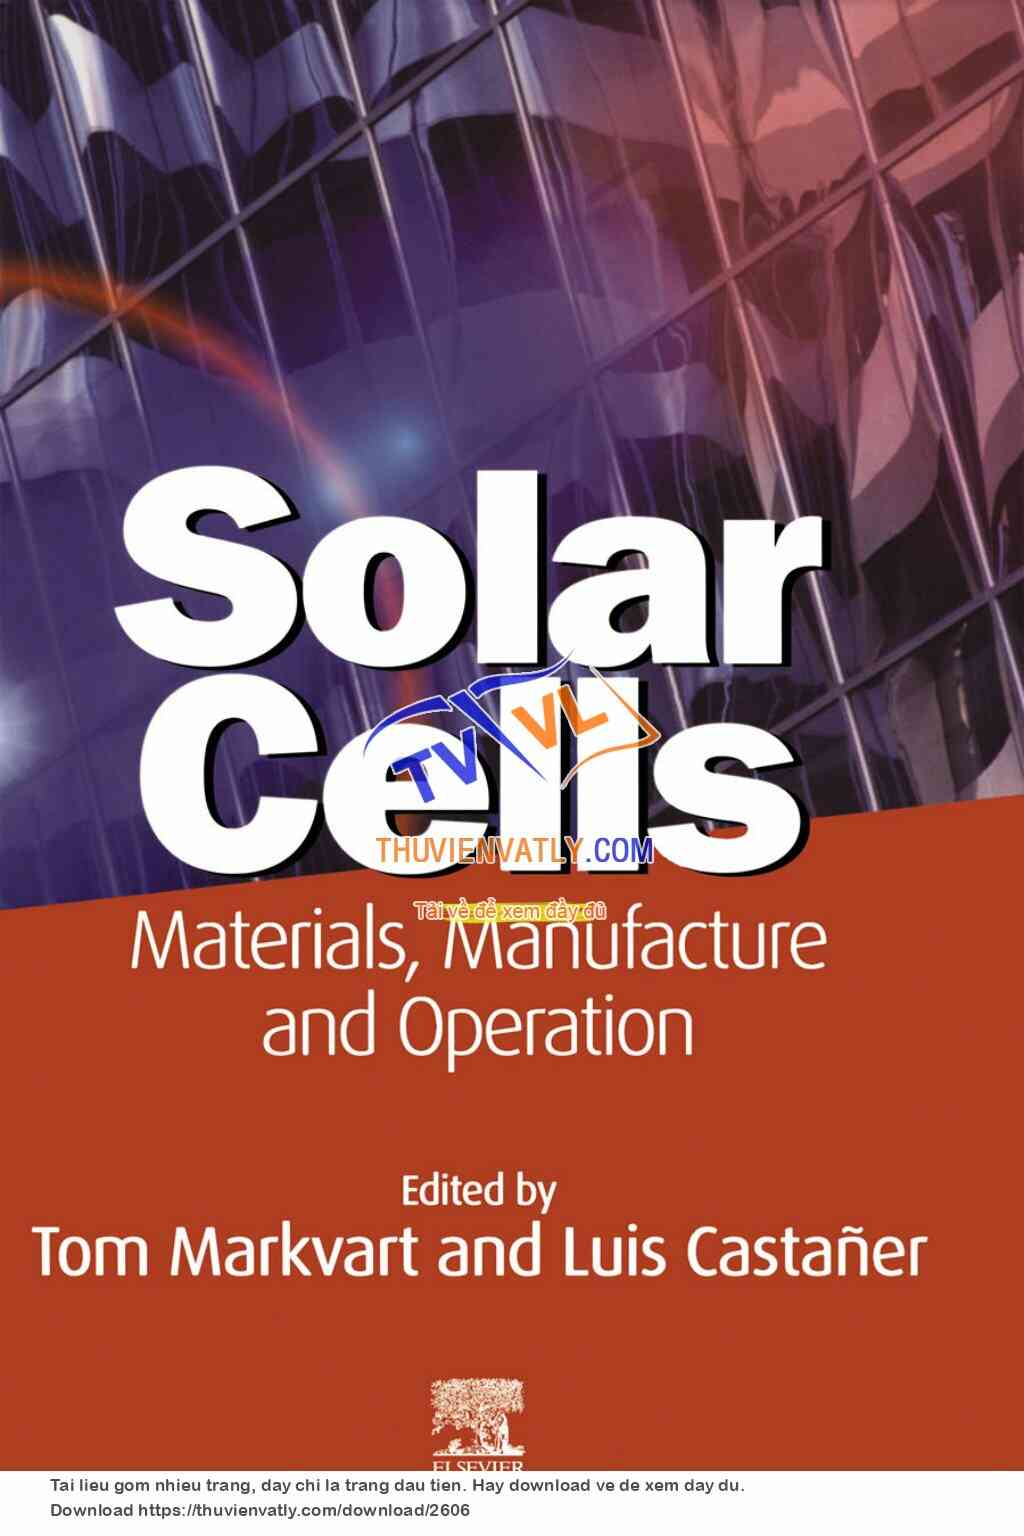 Solar Cells: Materials, Manufacture and Operation